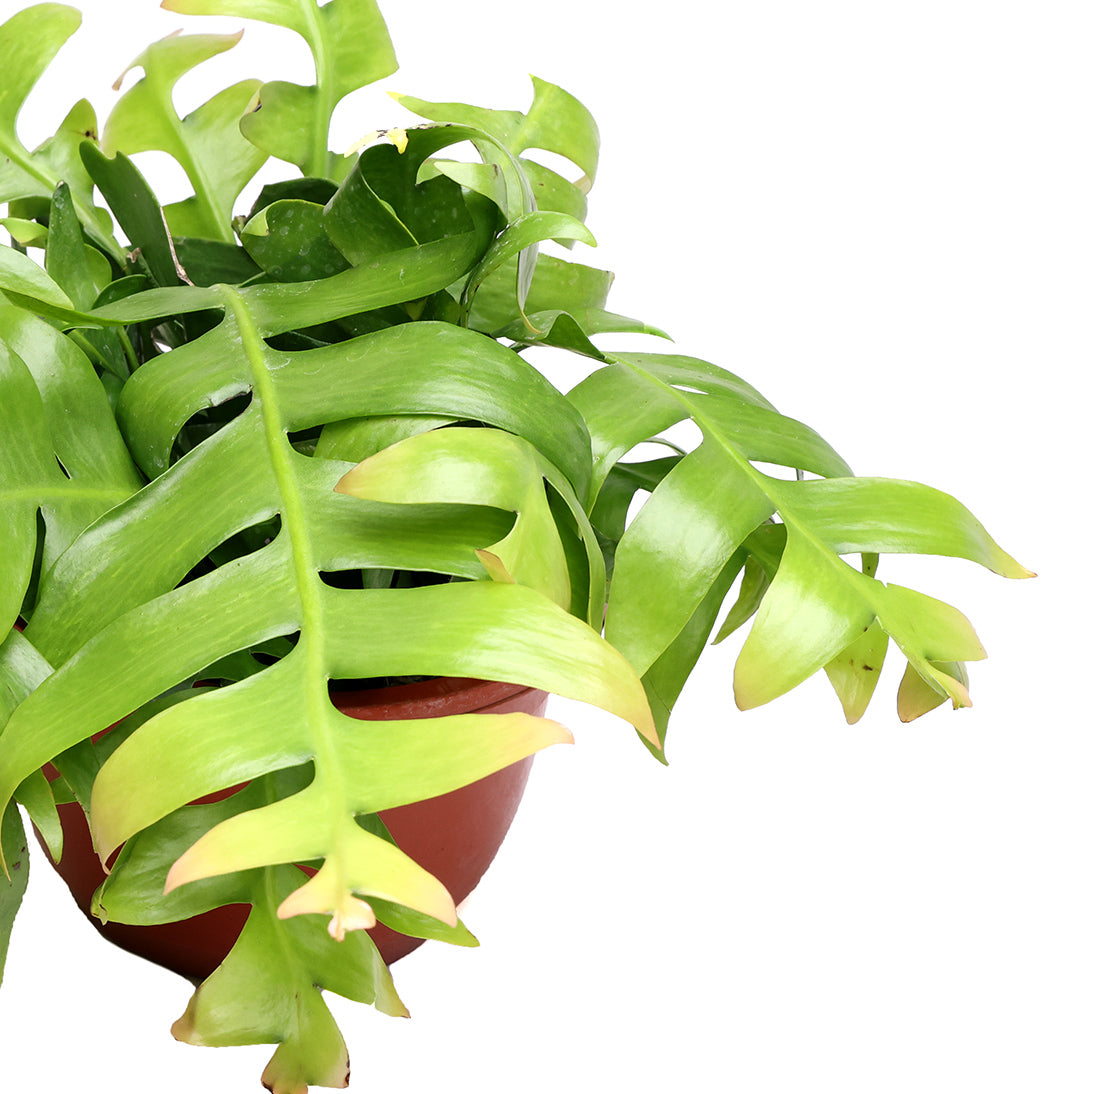 A vibrant green houseplant with elongated leaves, growing in a Chive Studio terracotta pot, isolated on a white background.